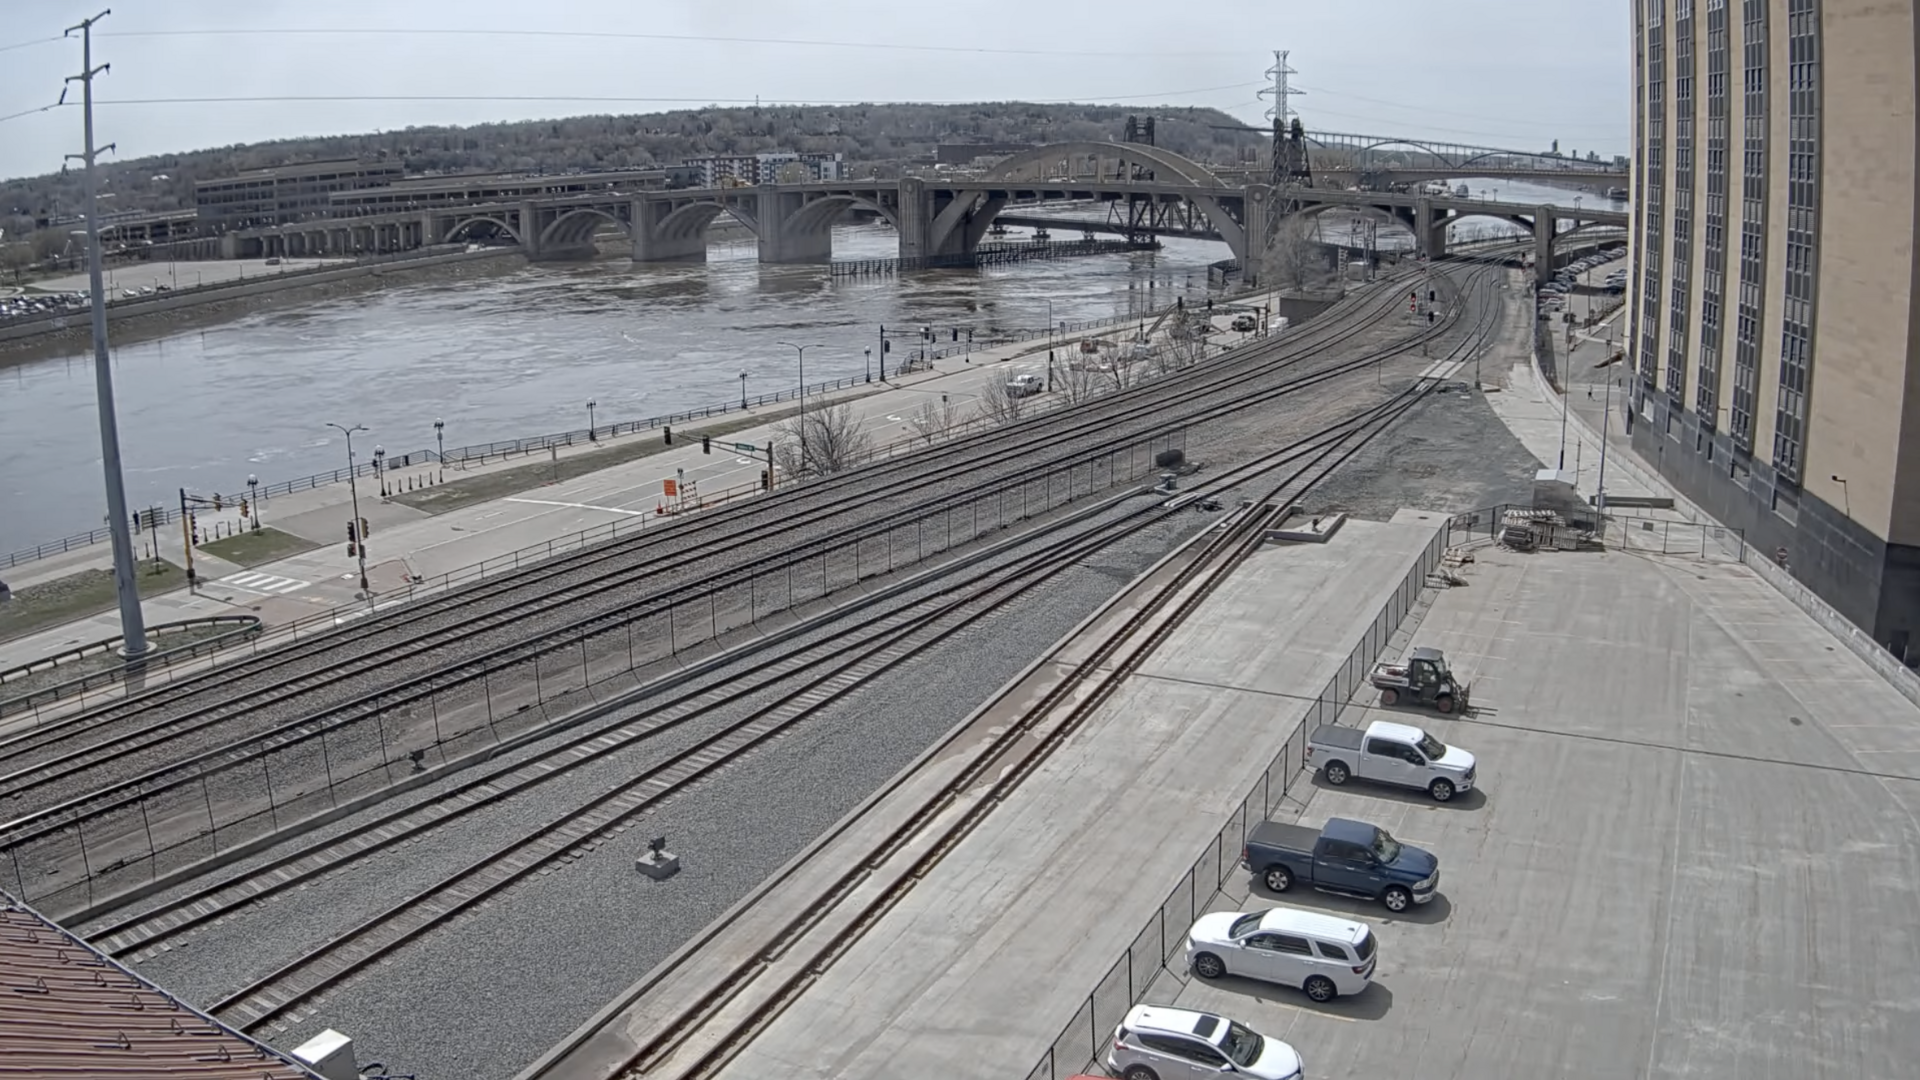 Screenshot of the Union Depot Railfan Cam 1 livestream that shows Shepherd Road, the Mississippi River, the Robert Street bridge and a bunch of railroad tracks